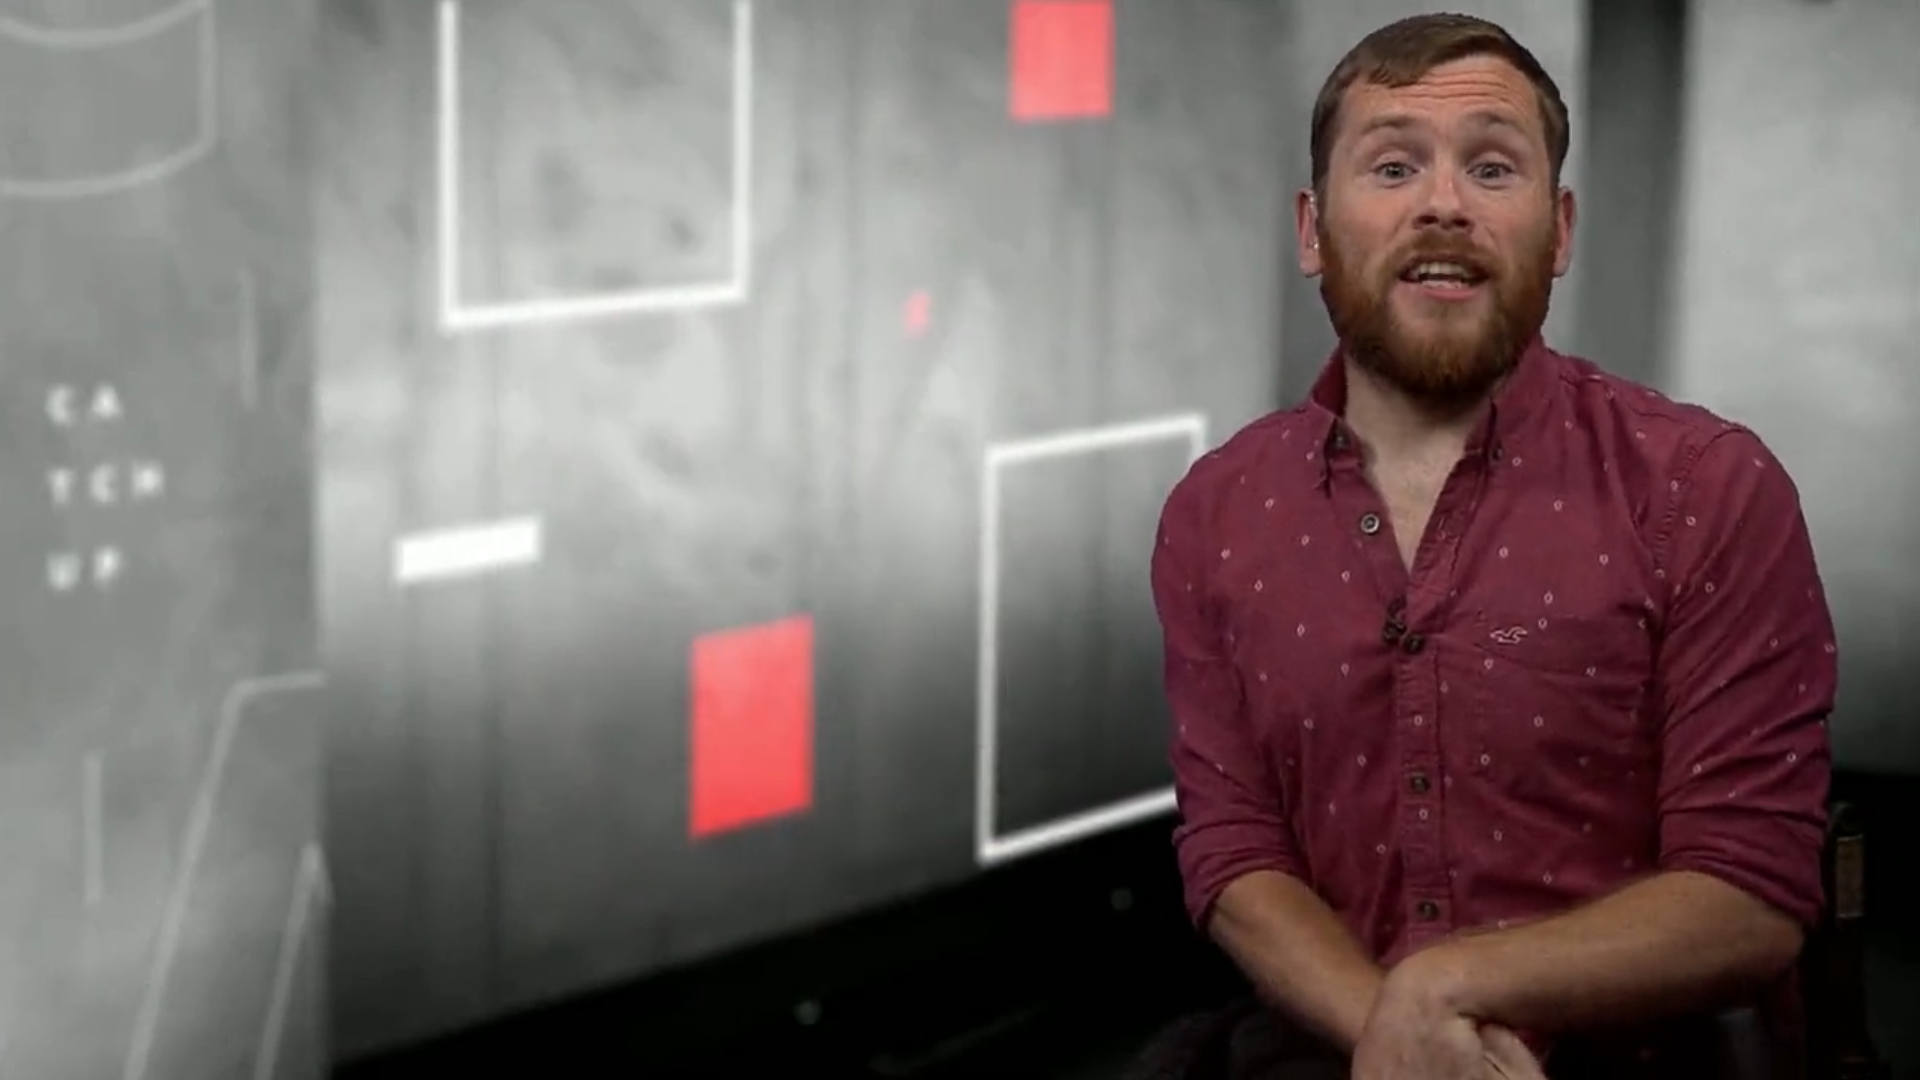 ellis, a man with short hair and a beard, presents the news in a studio. he is in front of a backdrop of squares 